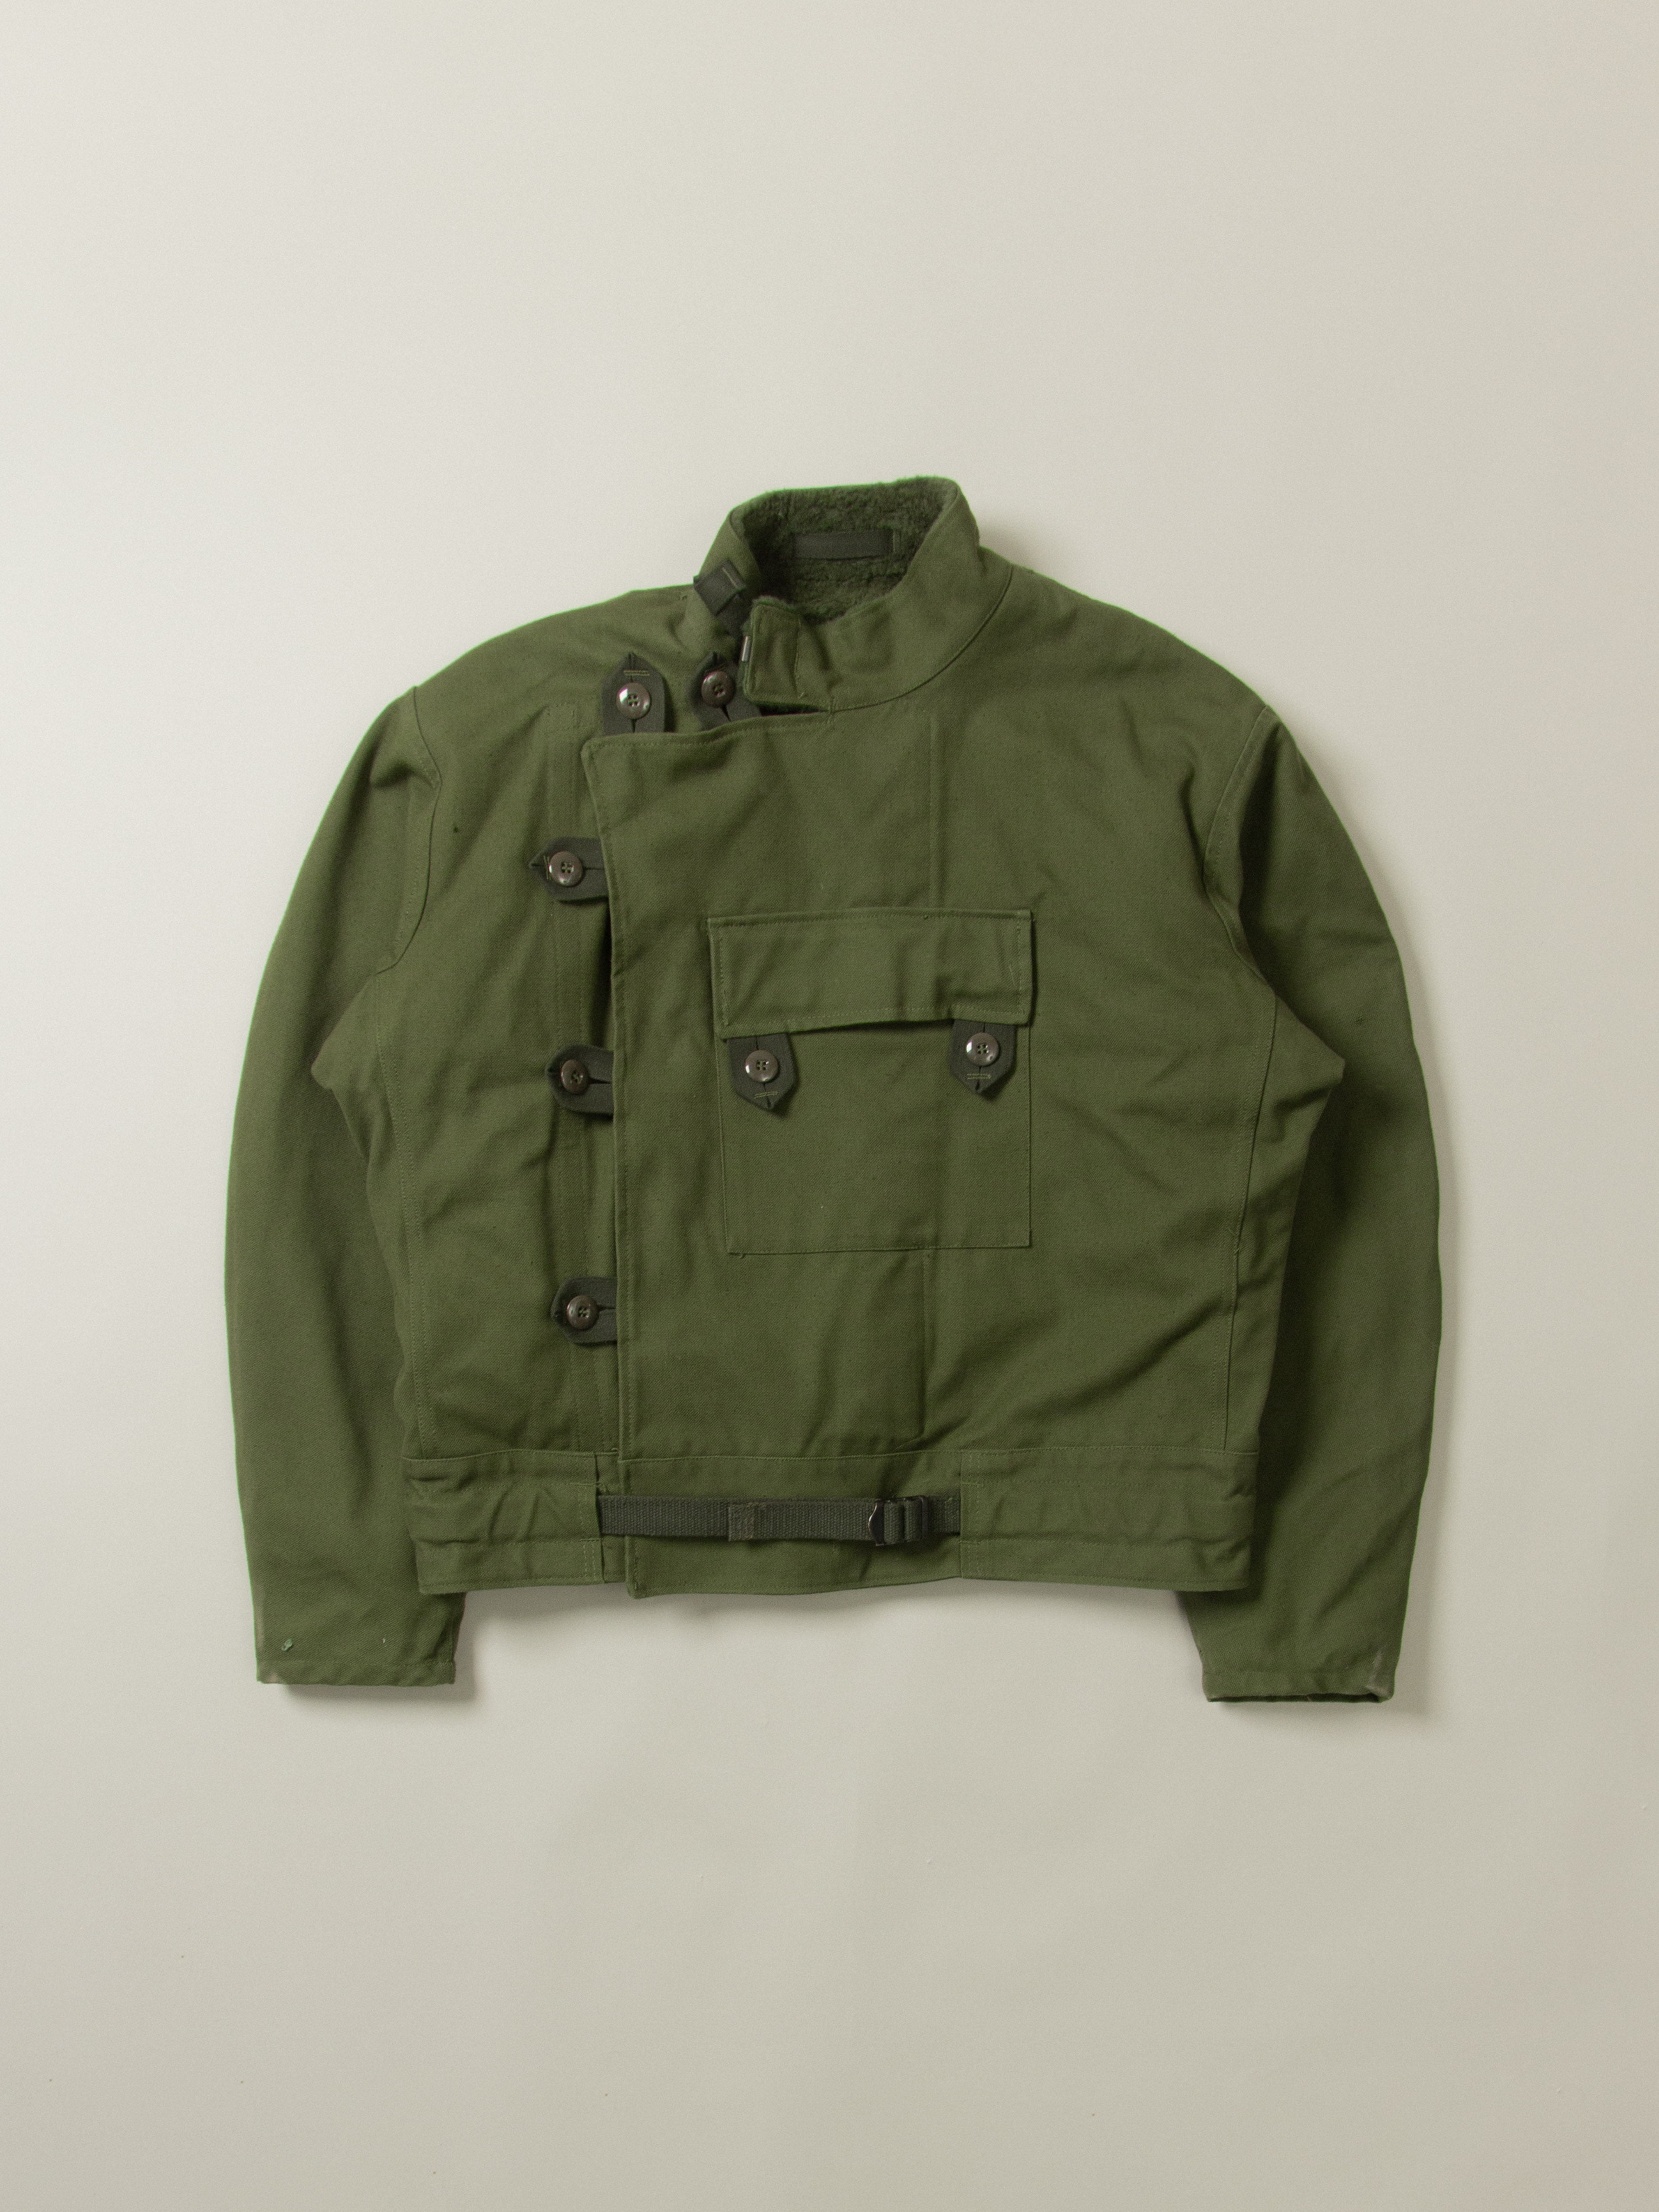 Vtg Deadstock 1960s Swedish Army Motorcycle Dispatch Jacket (XL)